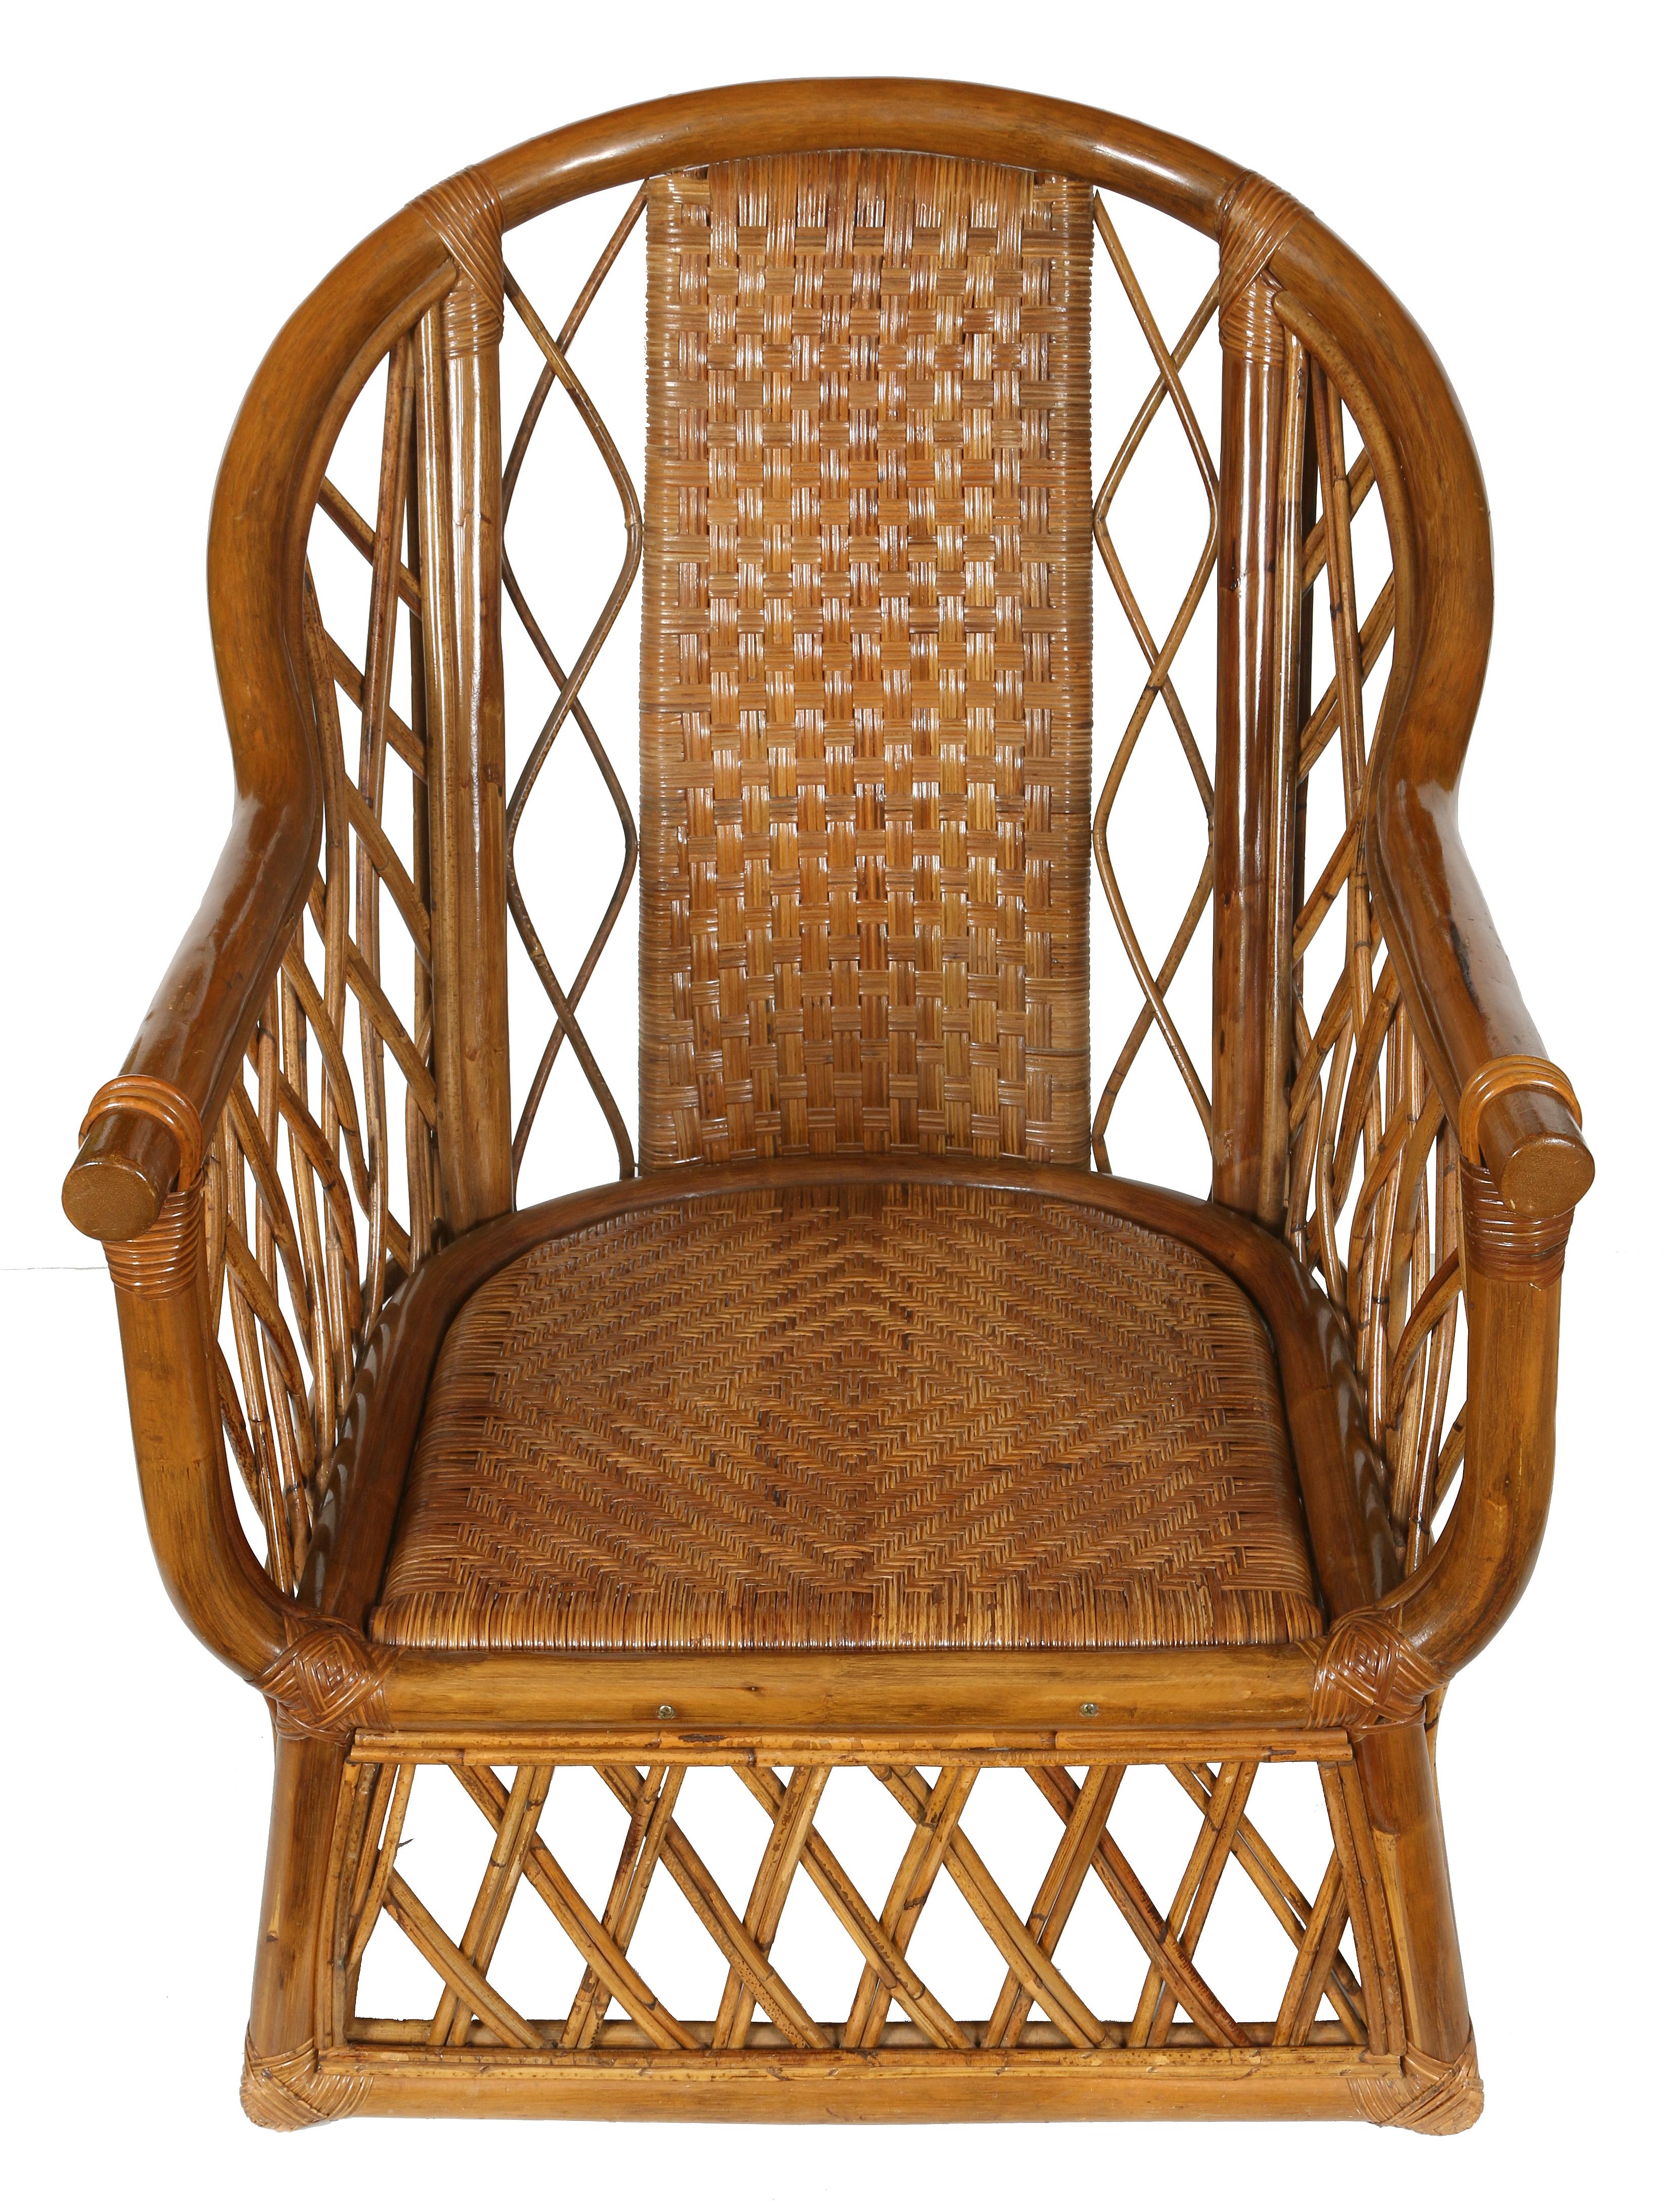 A pair of vintage rattan club chairs with cushions. This duo has great detailing, including a tightly woven back and seat, surrounded by an open diamond pattern on sides and base of chair. Quite solid and comfortable, these are a great option for